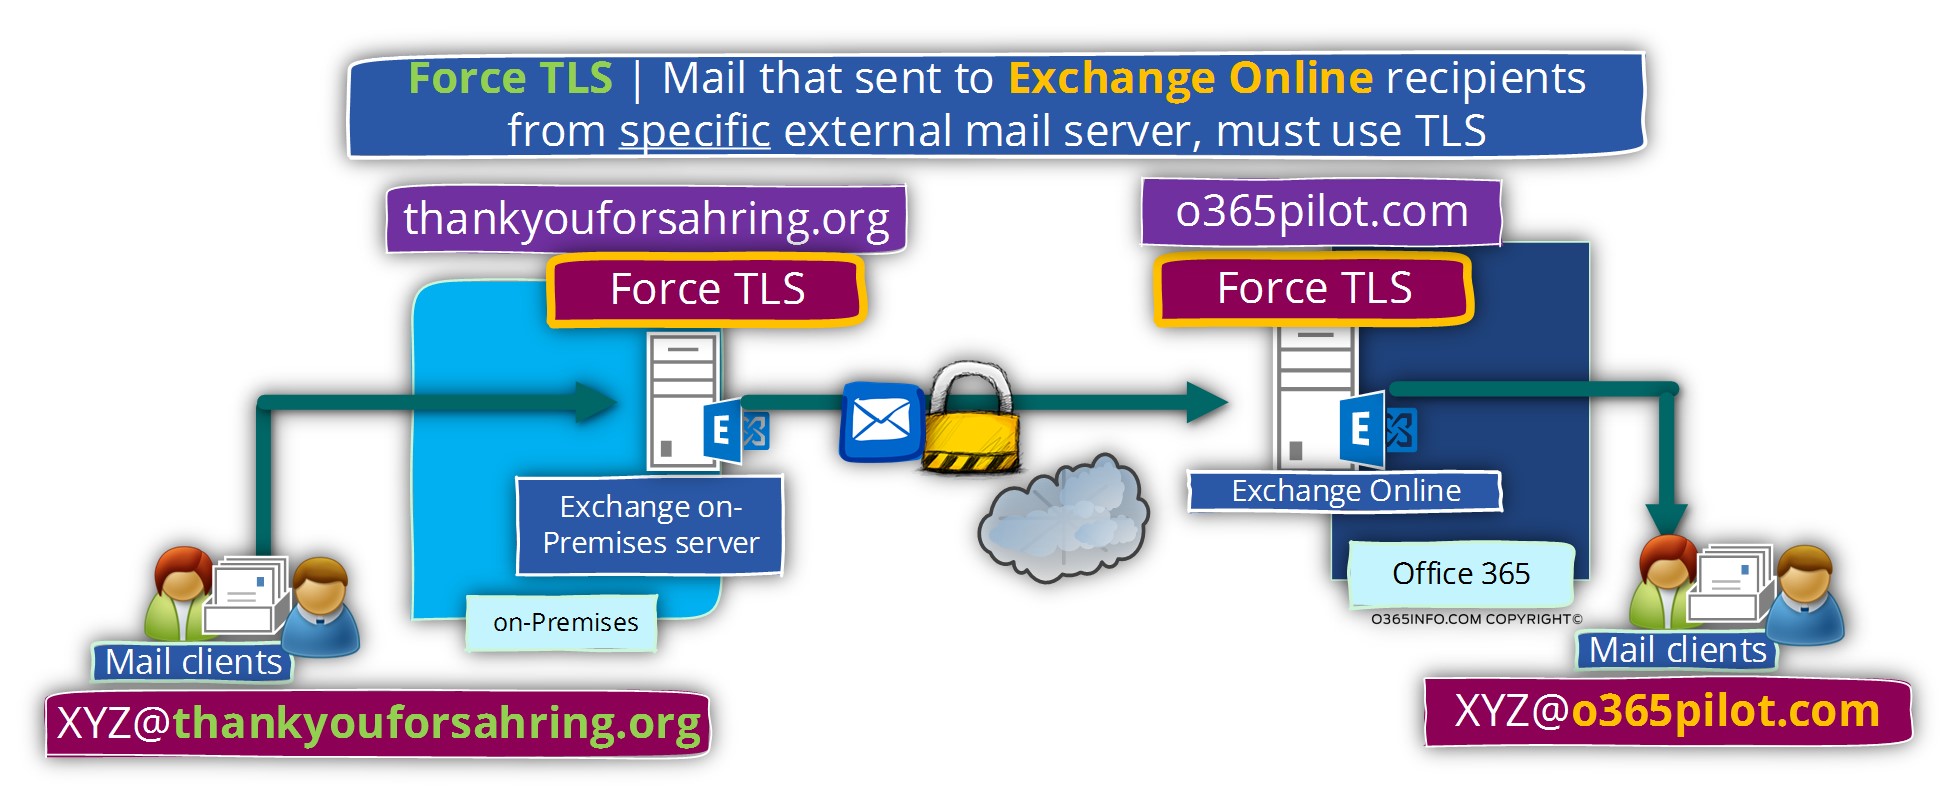 Force TLS - Mail that sent to Exchange Online recipients from specific external mail server must use TLS